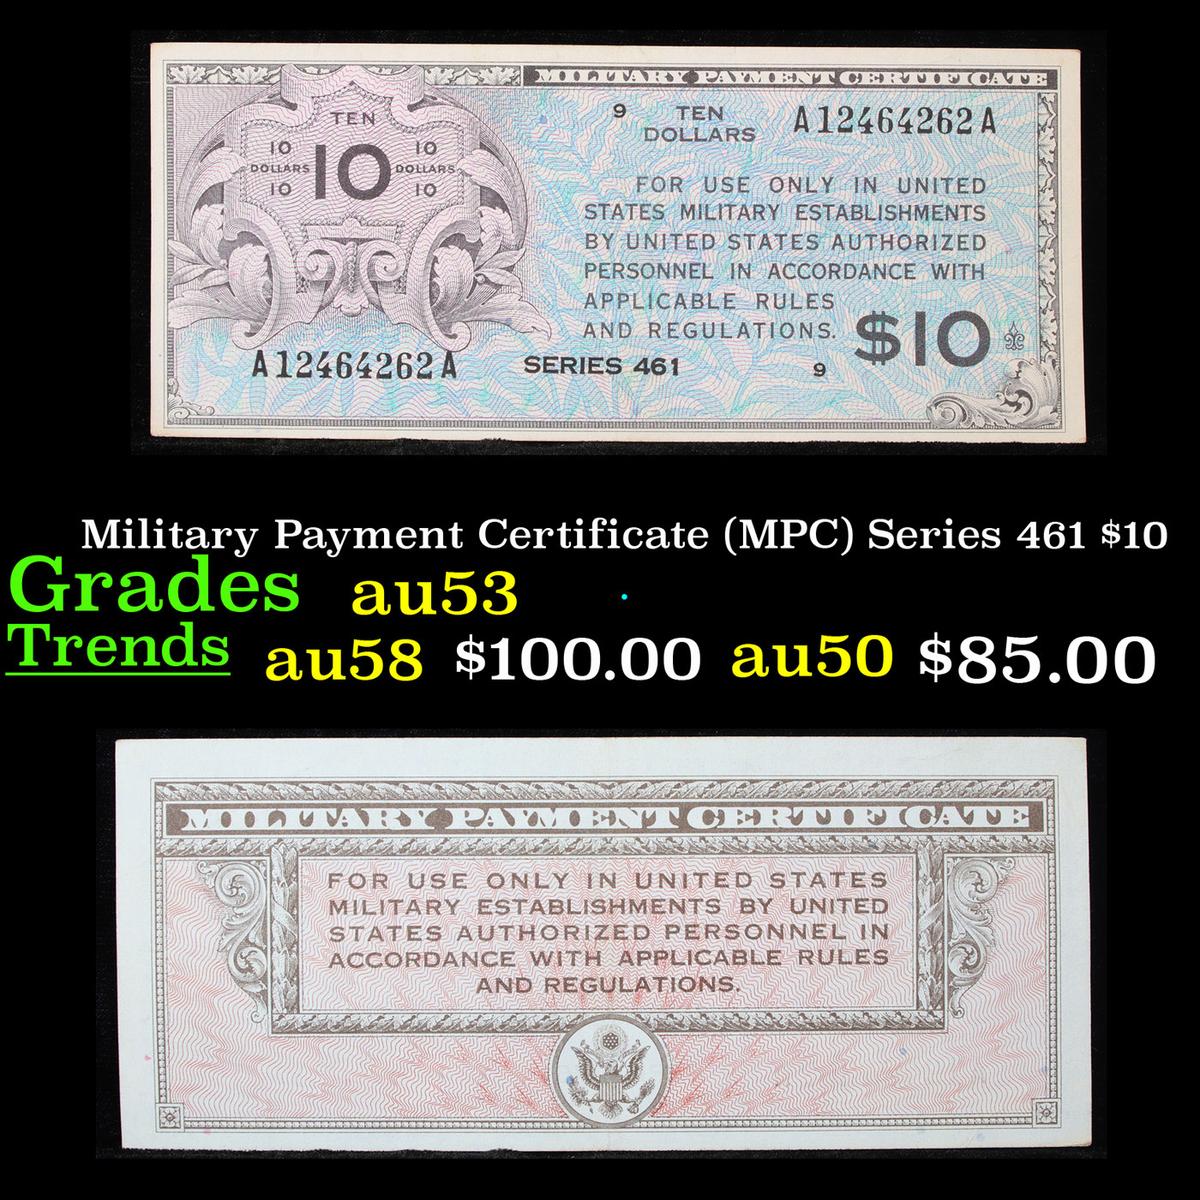 Military Payment Certificate (MPC) Series 461 $10 Grades Select AU